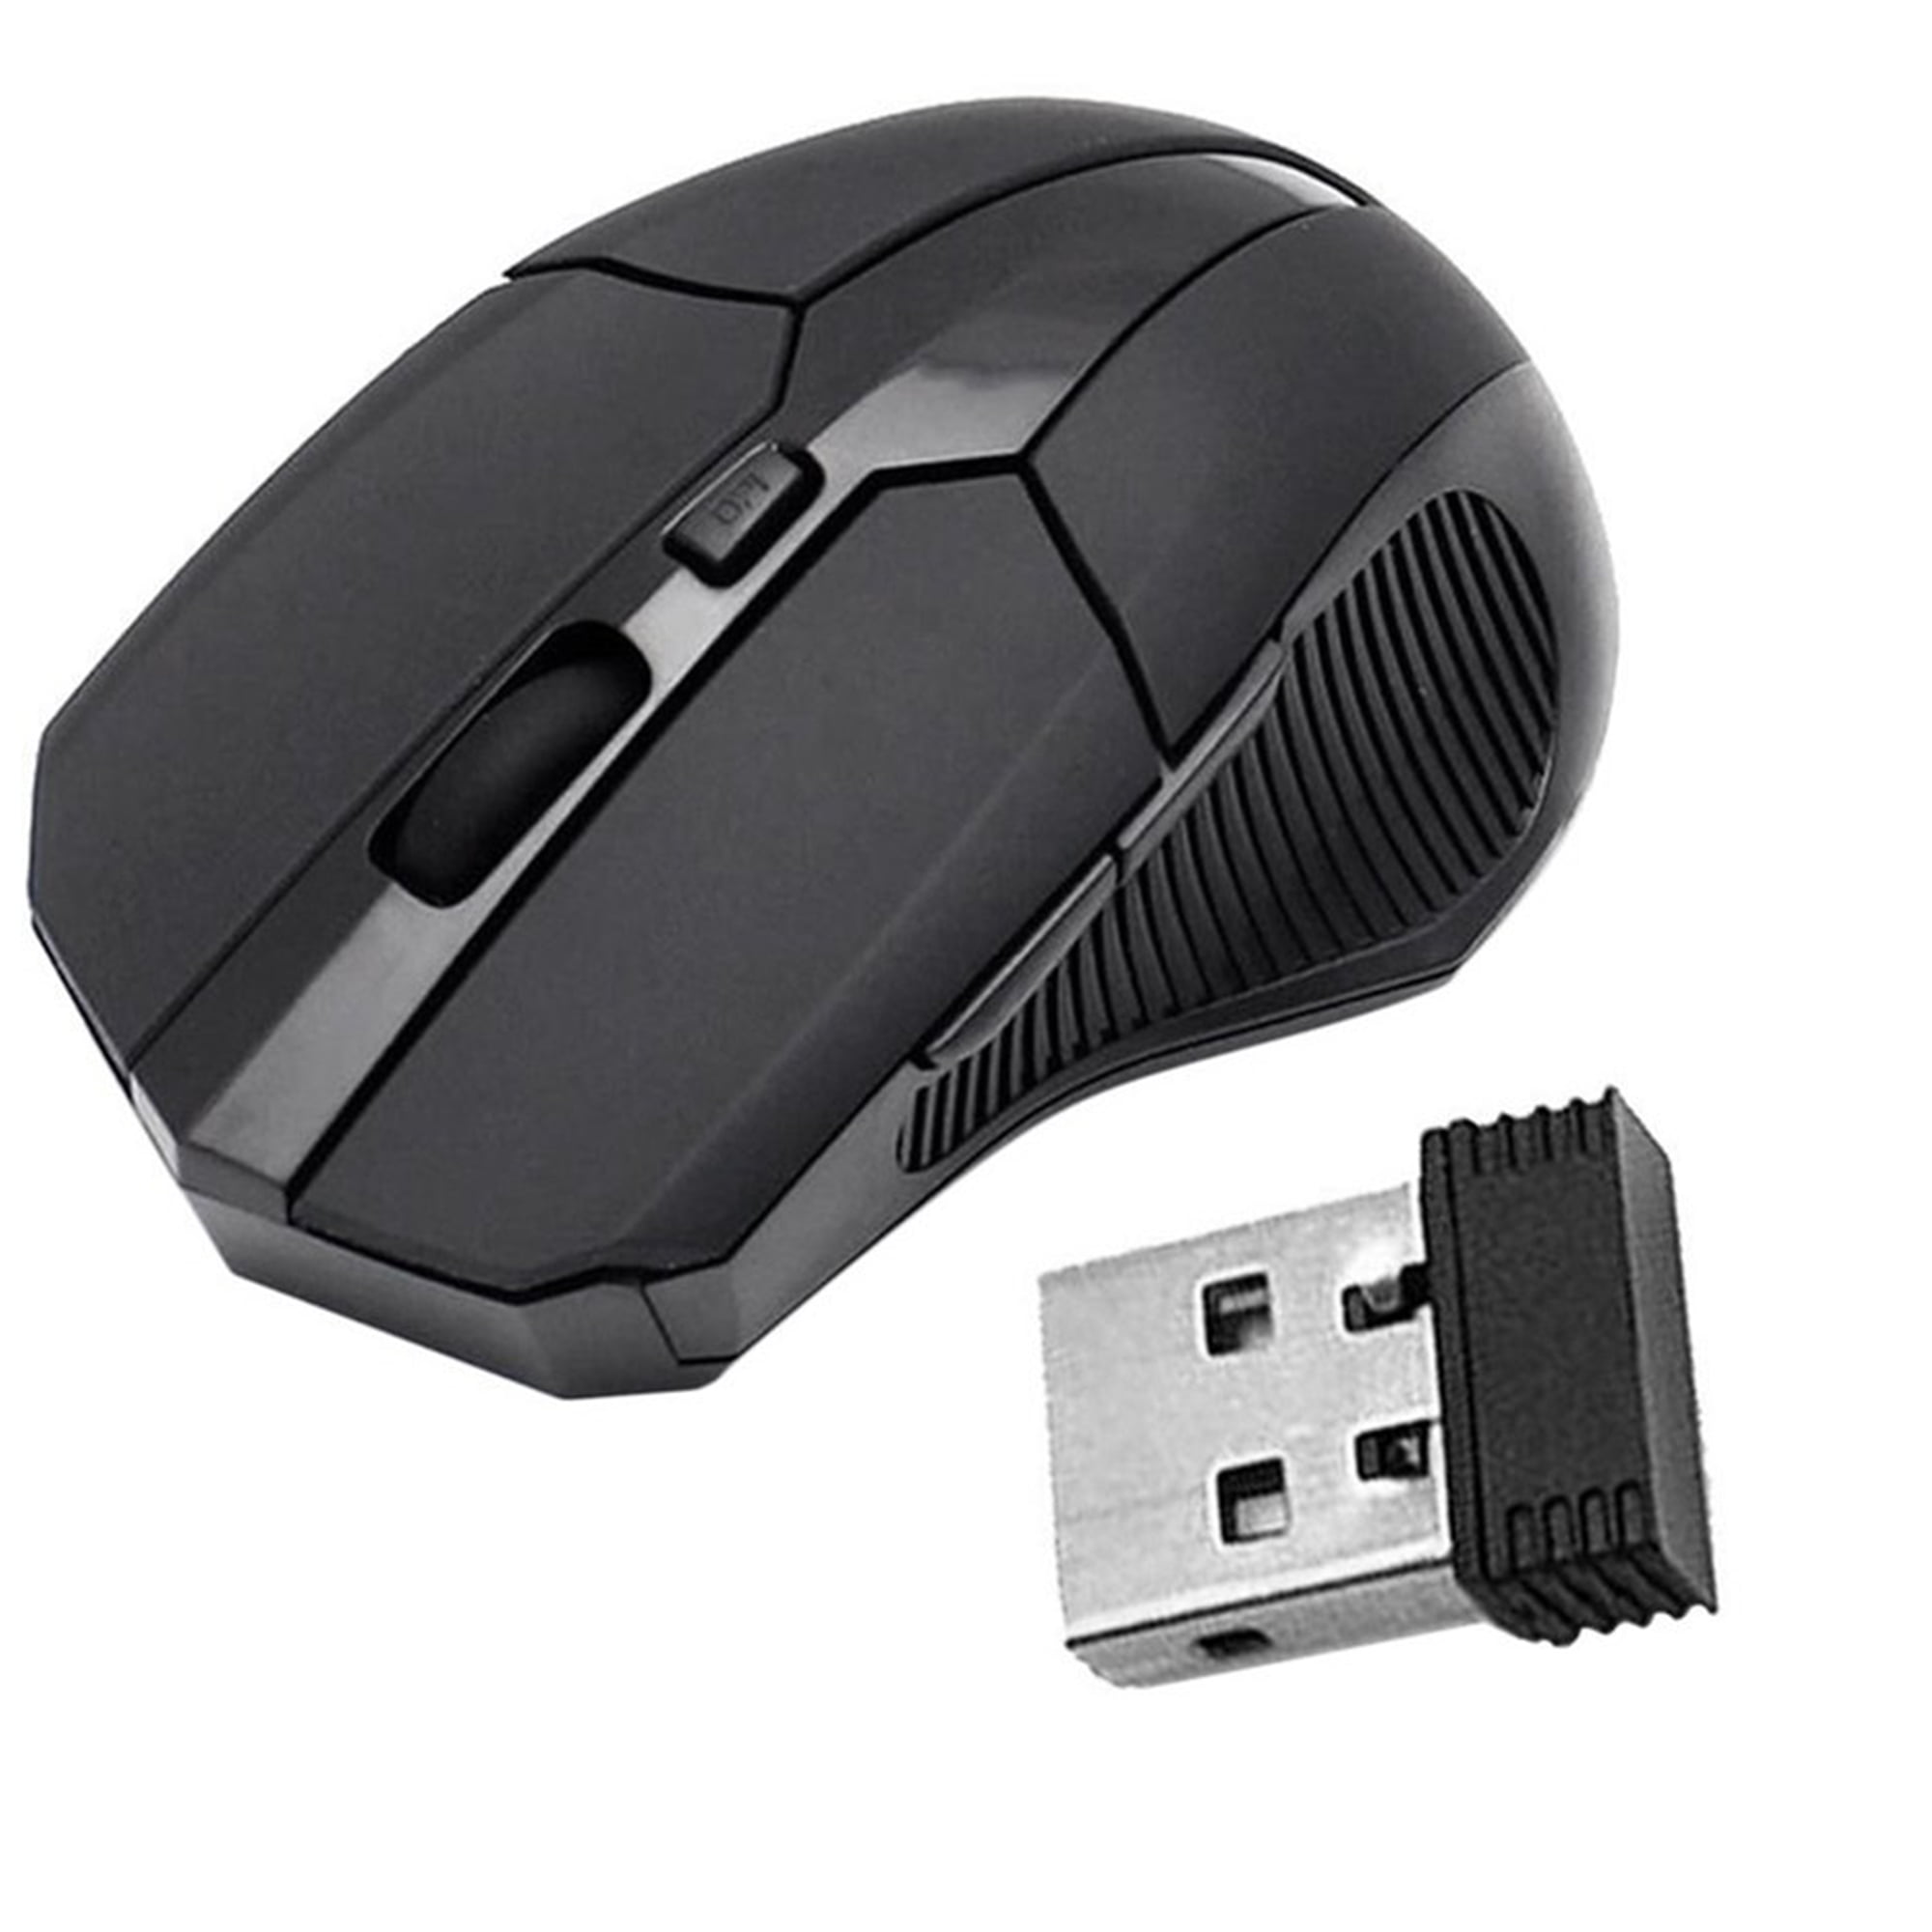 2.4GHz Wireless Mouse Computer Accessories Portable Wireless Mouse Black Mouse 